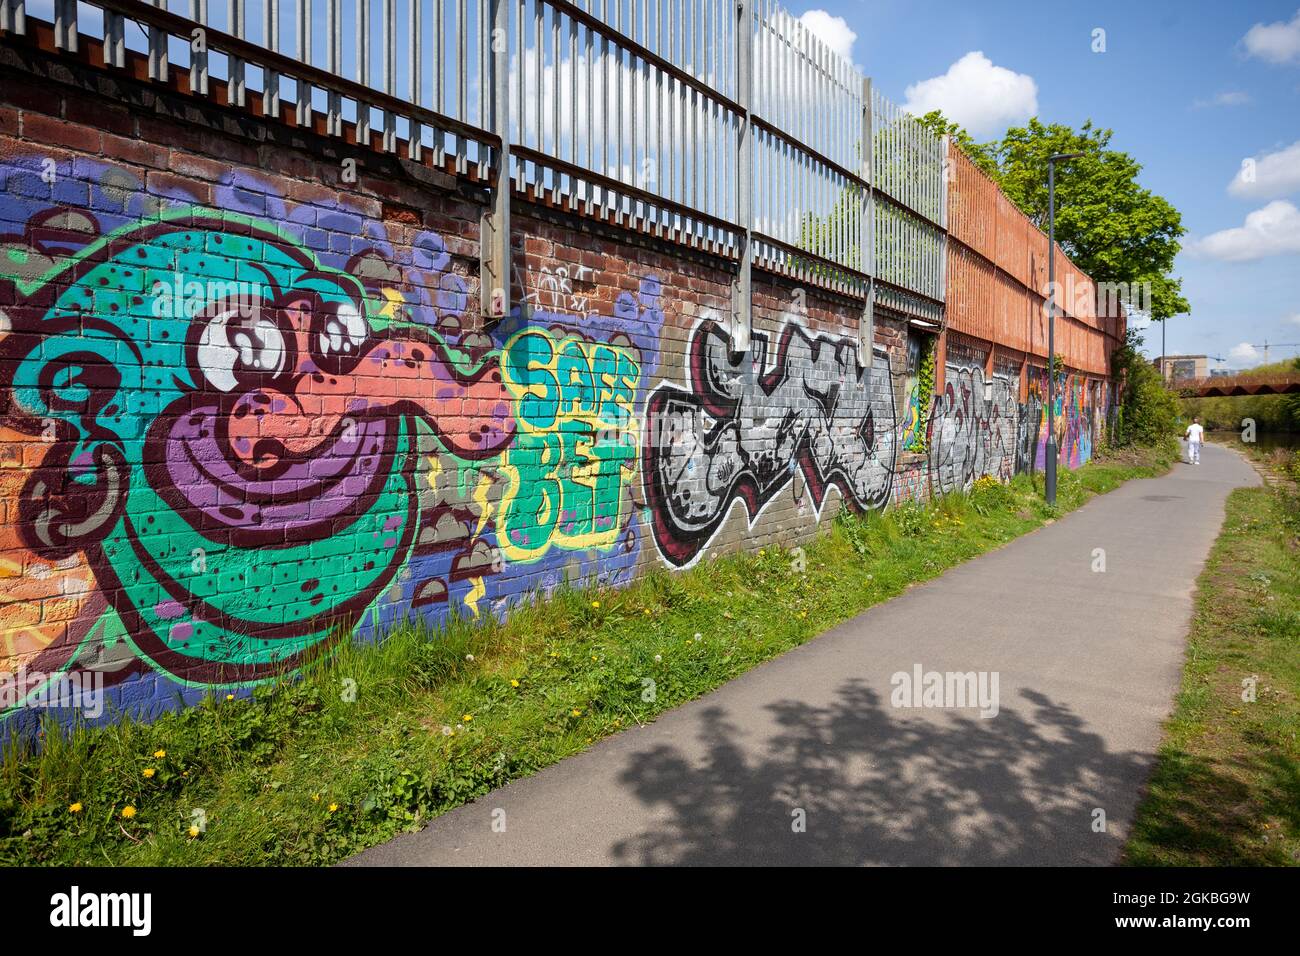 View of the Trans Pennine Trail near Leeds, with graffiti on a wall next to the path Stock Photo